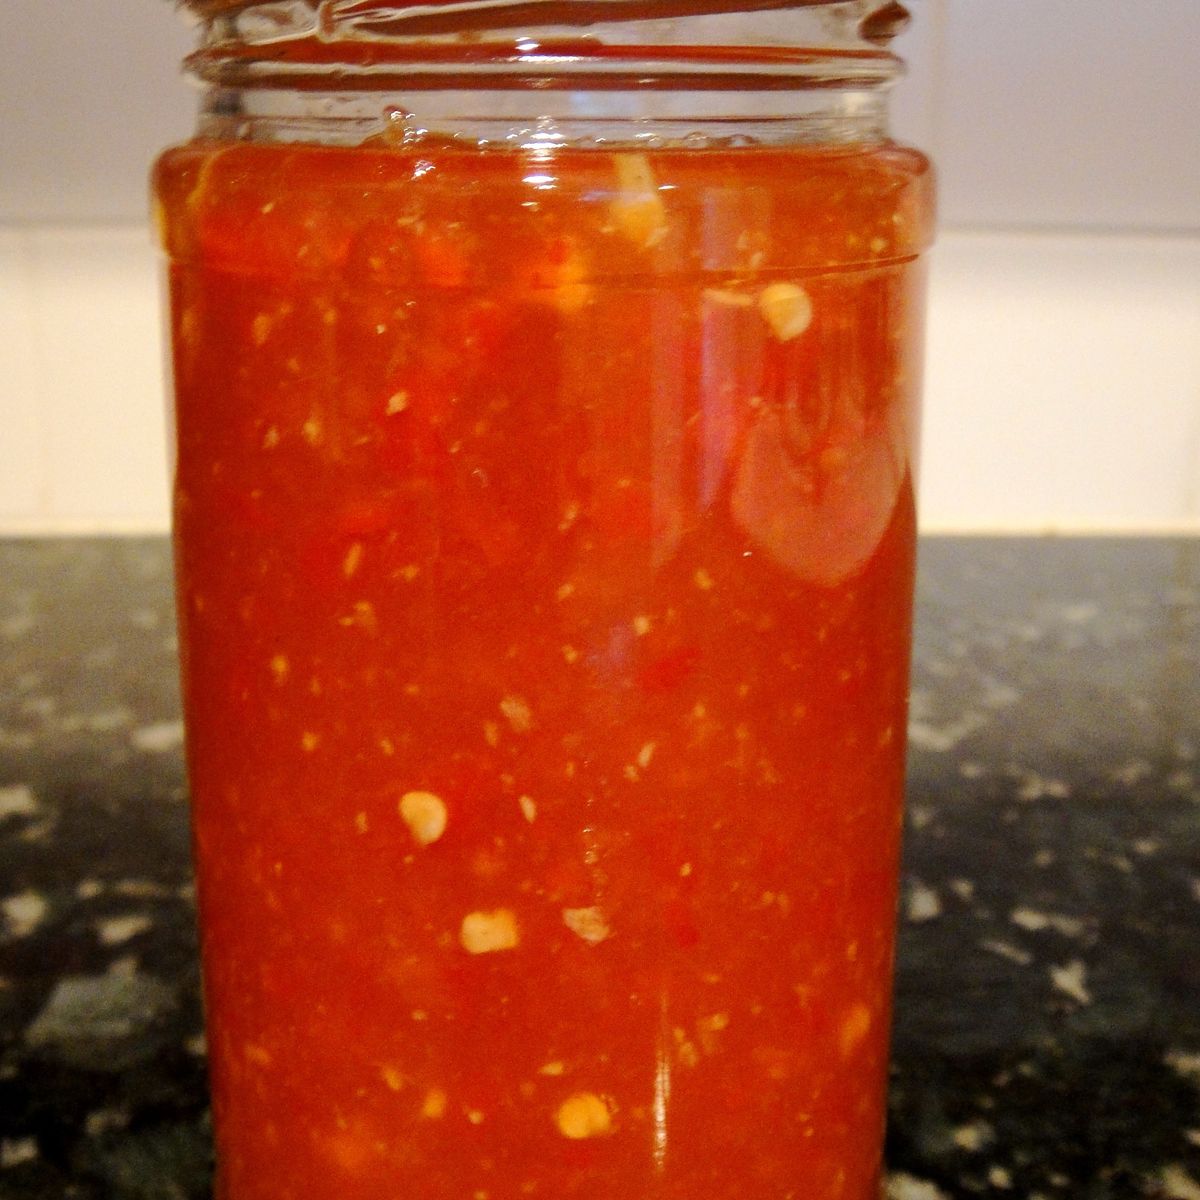 Thai Sweet Chili Sauce Recipe On Food52,Tiling A Shower Niche Pictures